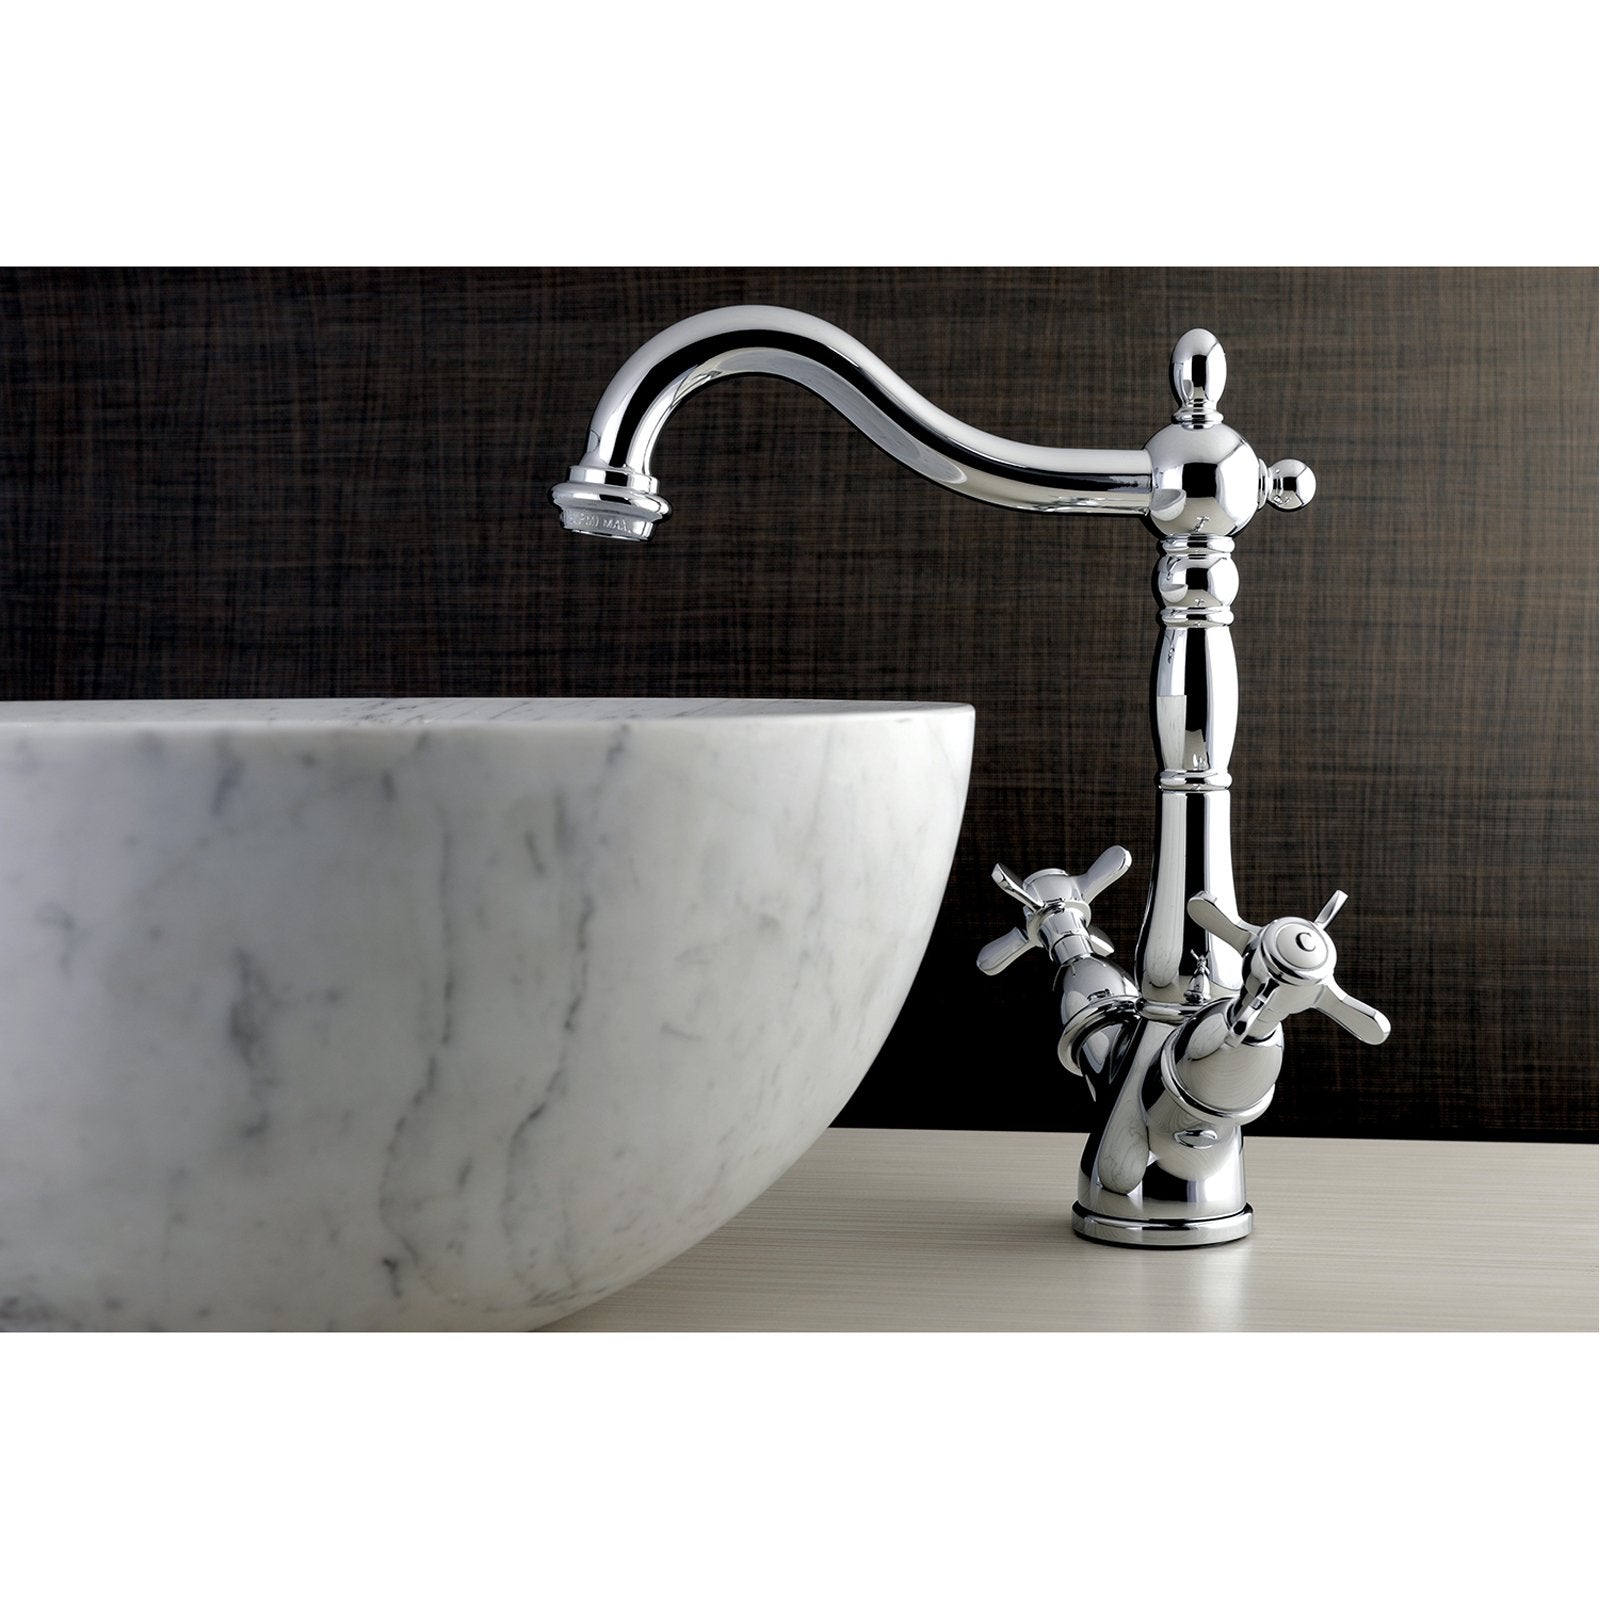 Kingston Brass Essex Vessel Sink Faucet with Deck Plate-Bathroom Faucets-Free Shipping-Directsinks.